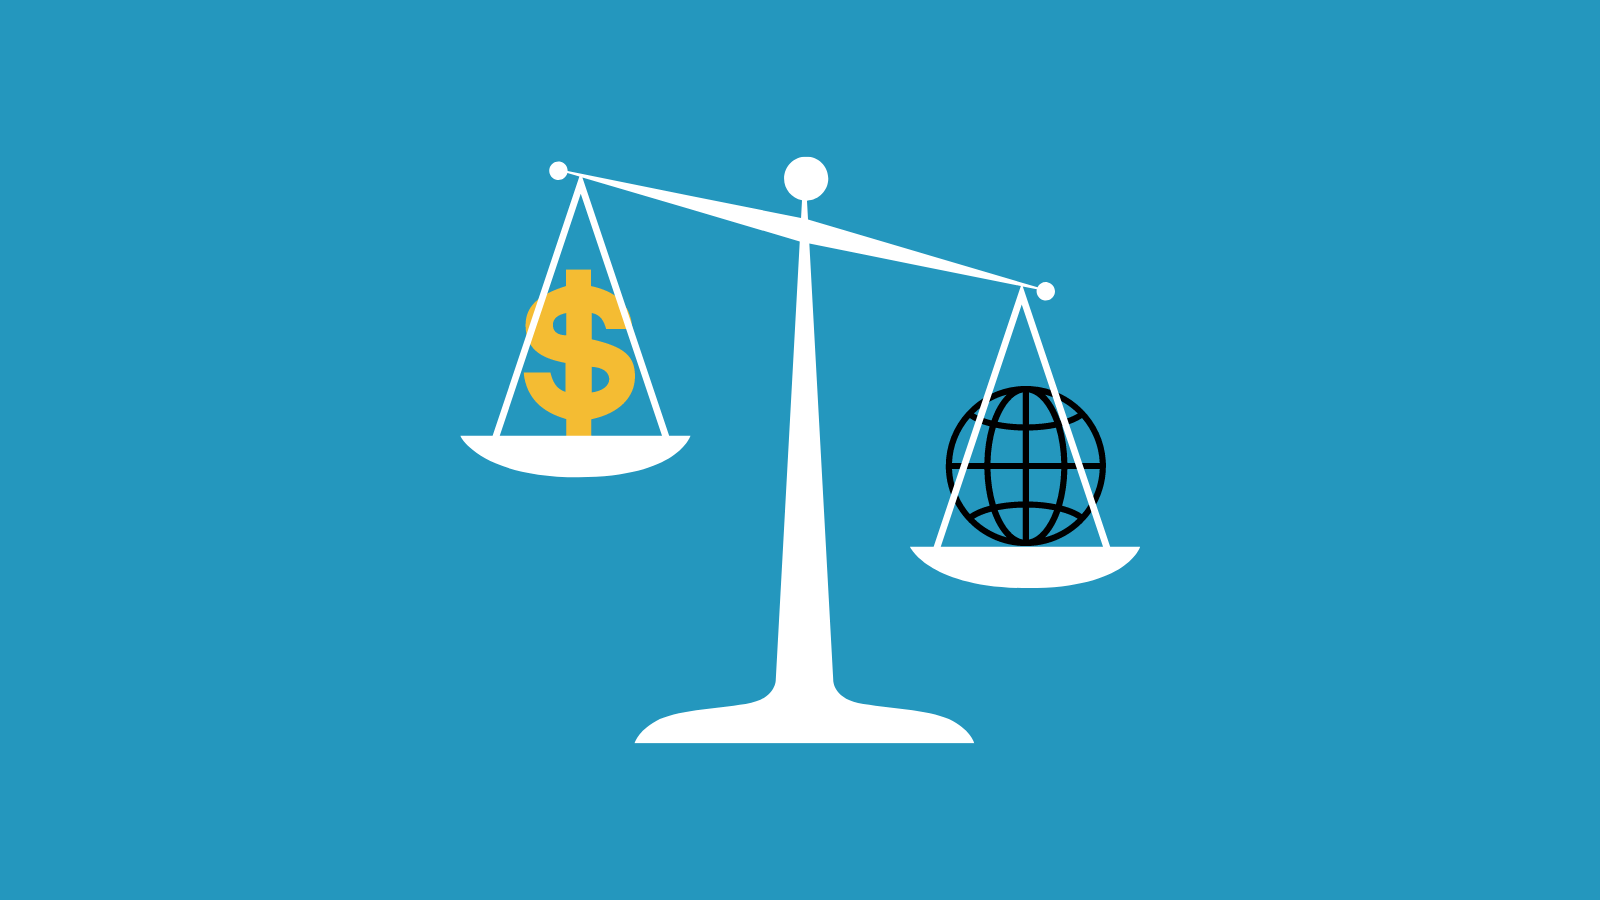 A graphic of a scale with a dollar sign on the left and an internet globe symbol on the right